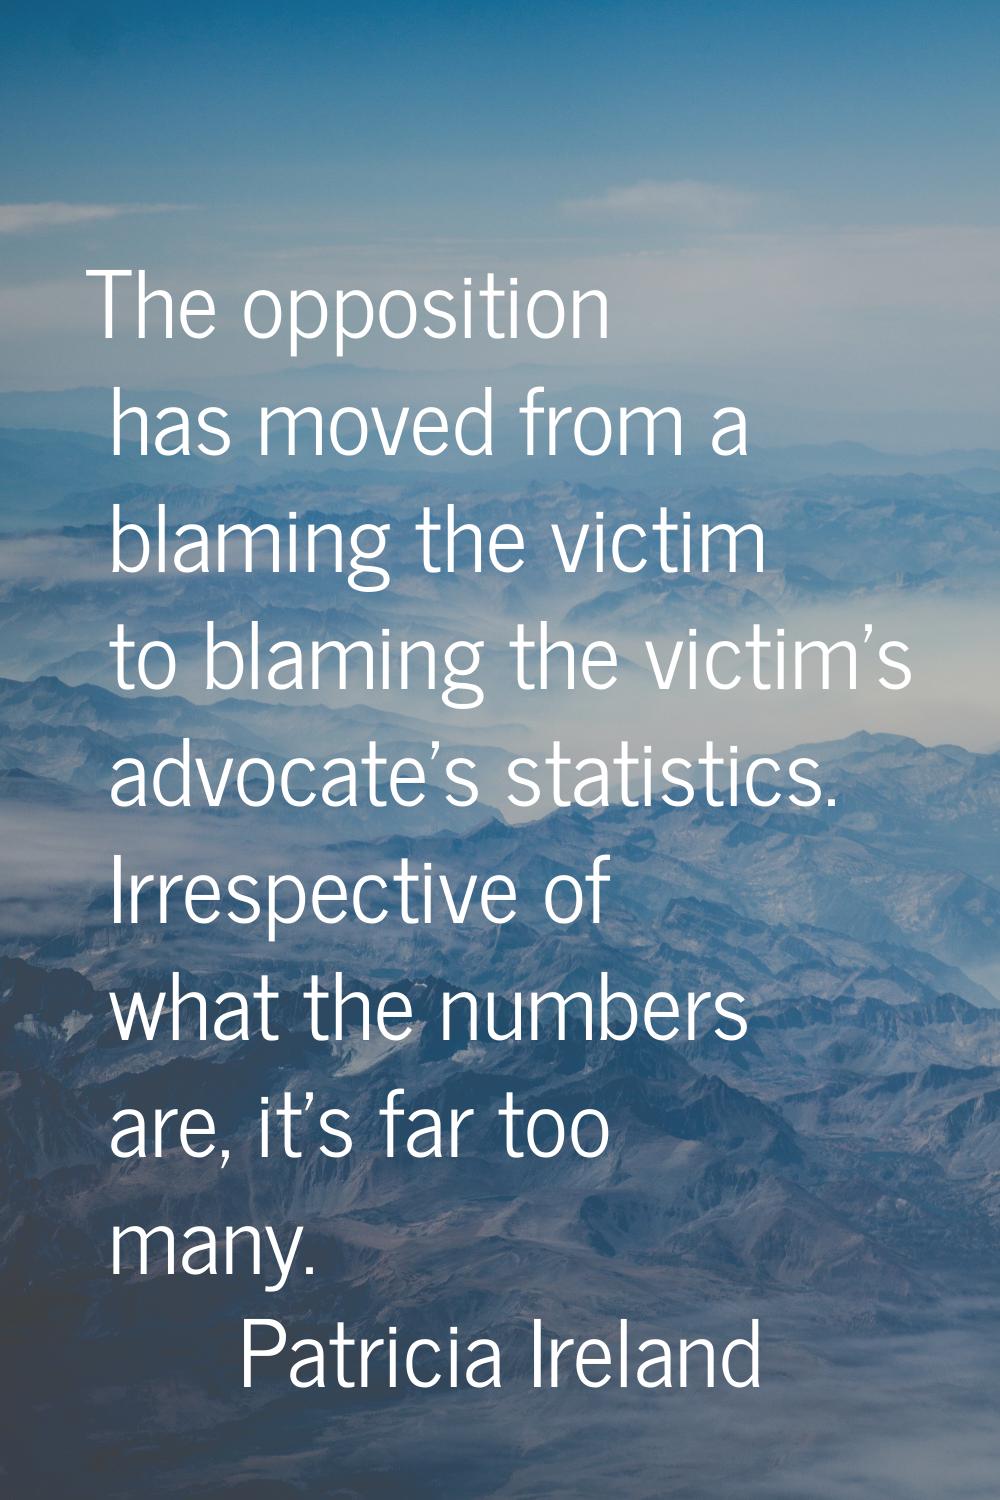 The opposition has moved from a blaming the victim to blaming the victim's advocate's statistics. I